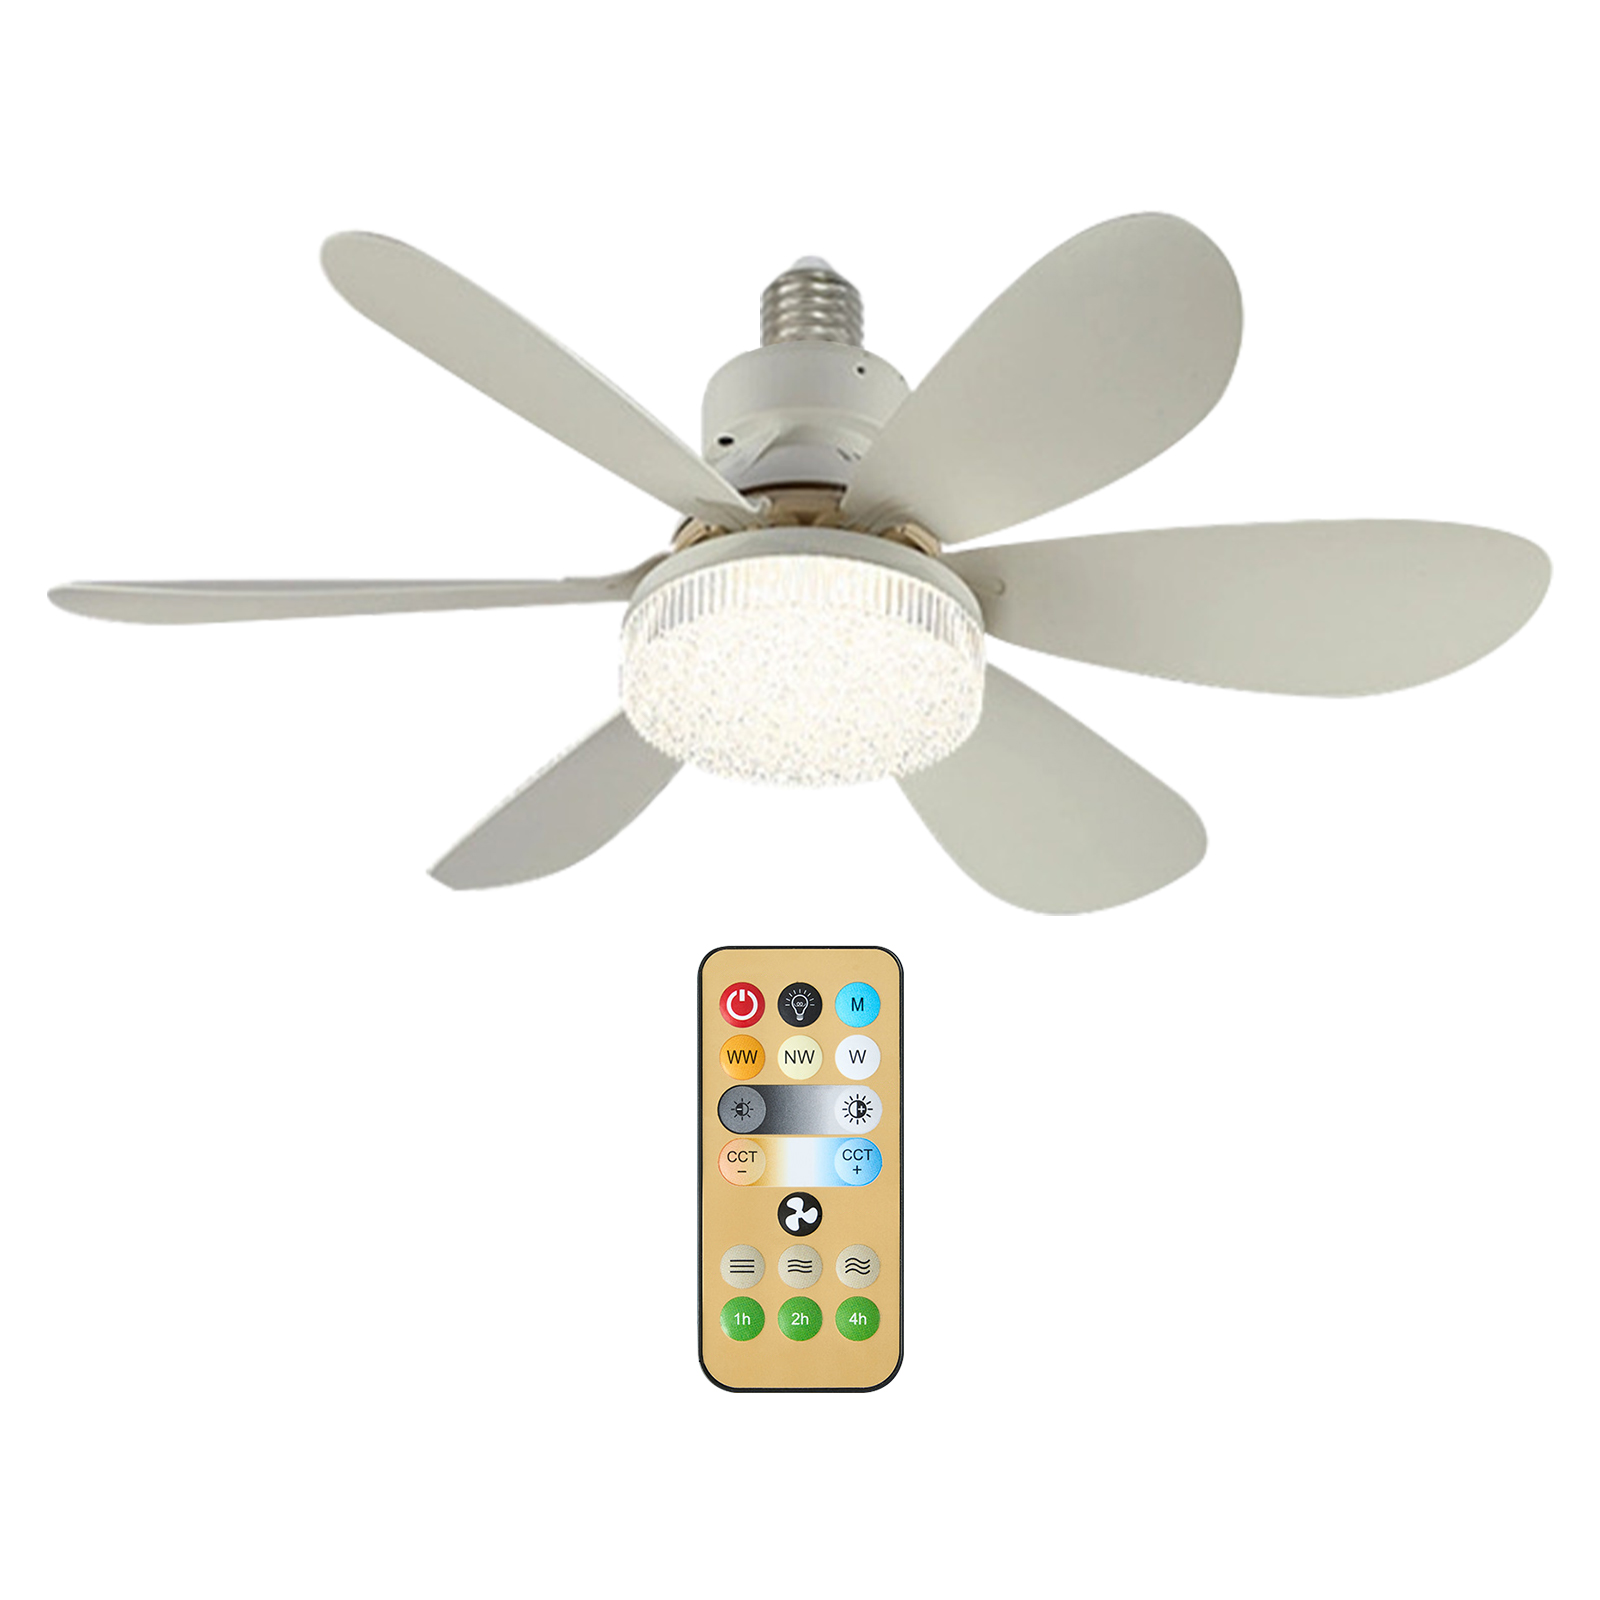 Fan Lamp,Remote Dimmable Kids Dimmable Kids Room Fan Remote Dimmable Led Fan Remote Kids Room Bedroom - image 1 of 6